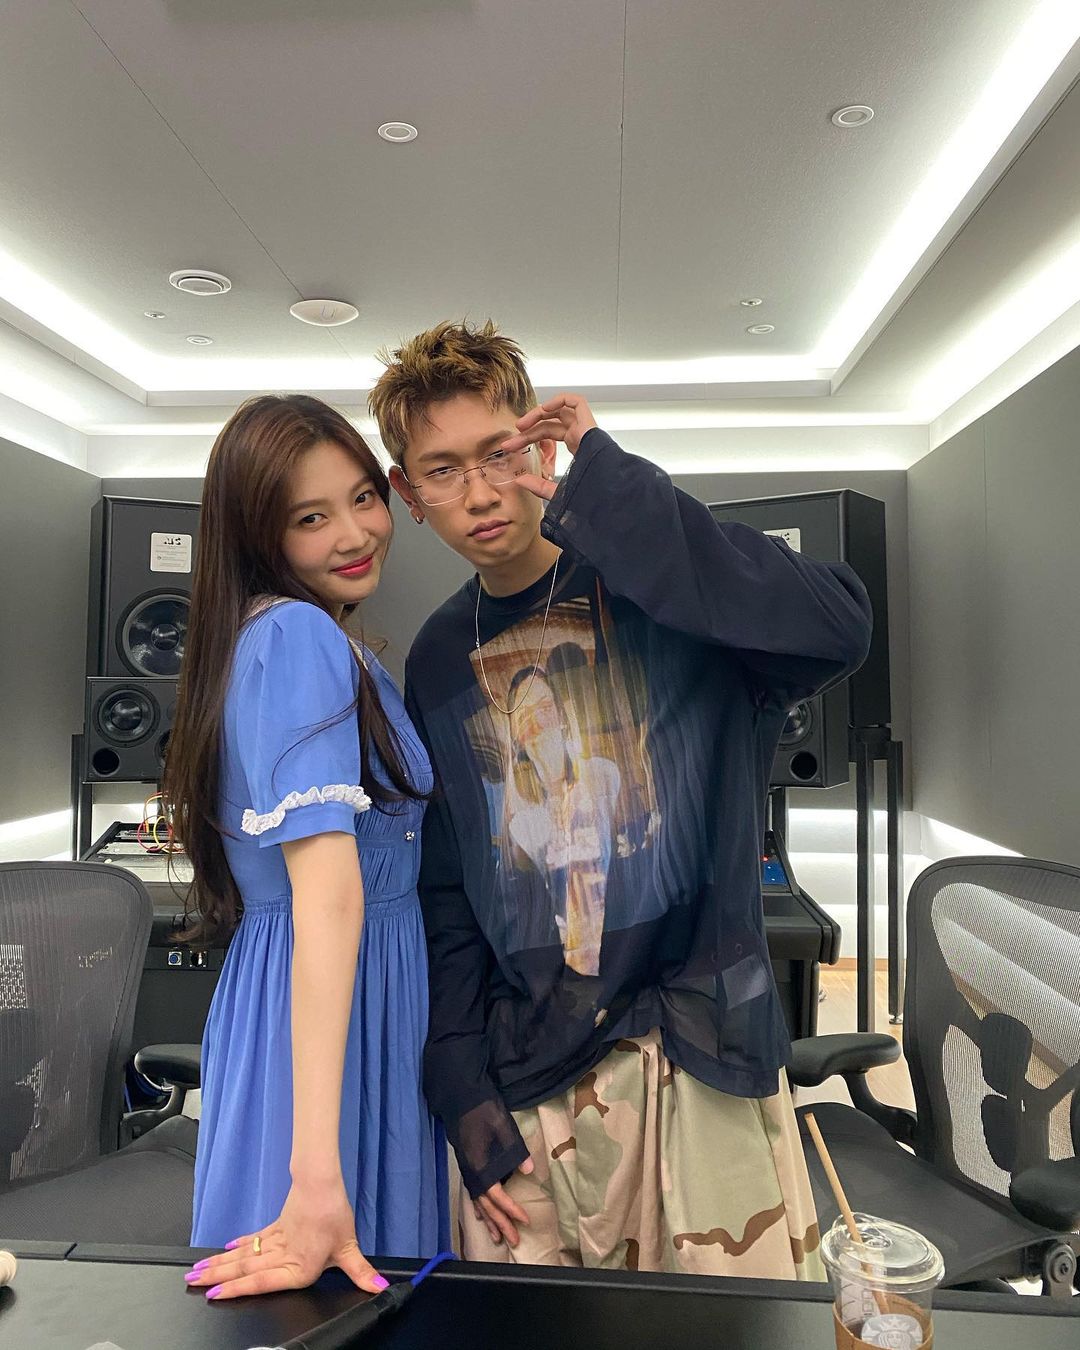 Joy and Crush confirmed to be dating - in the studio together